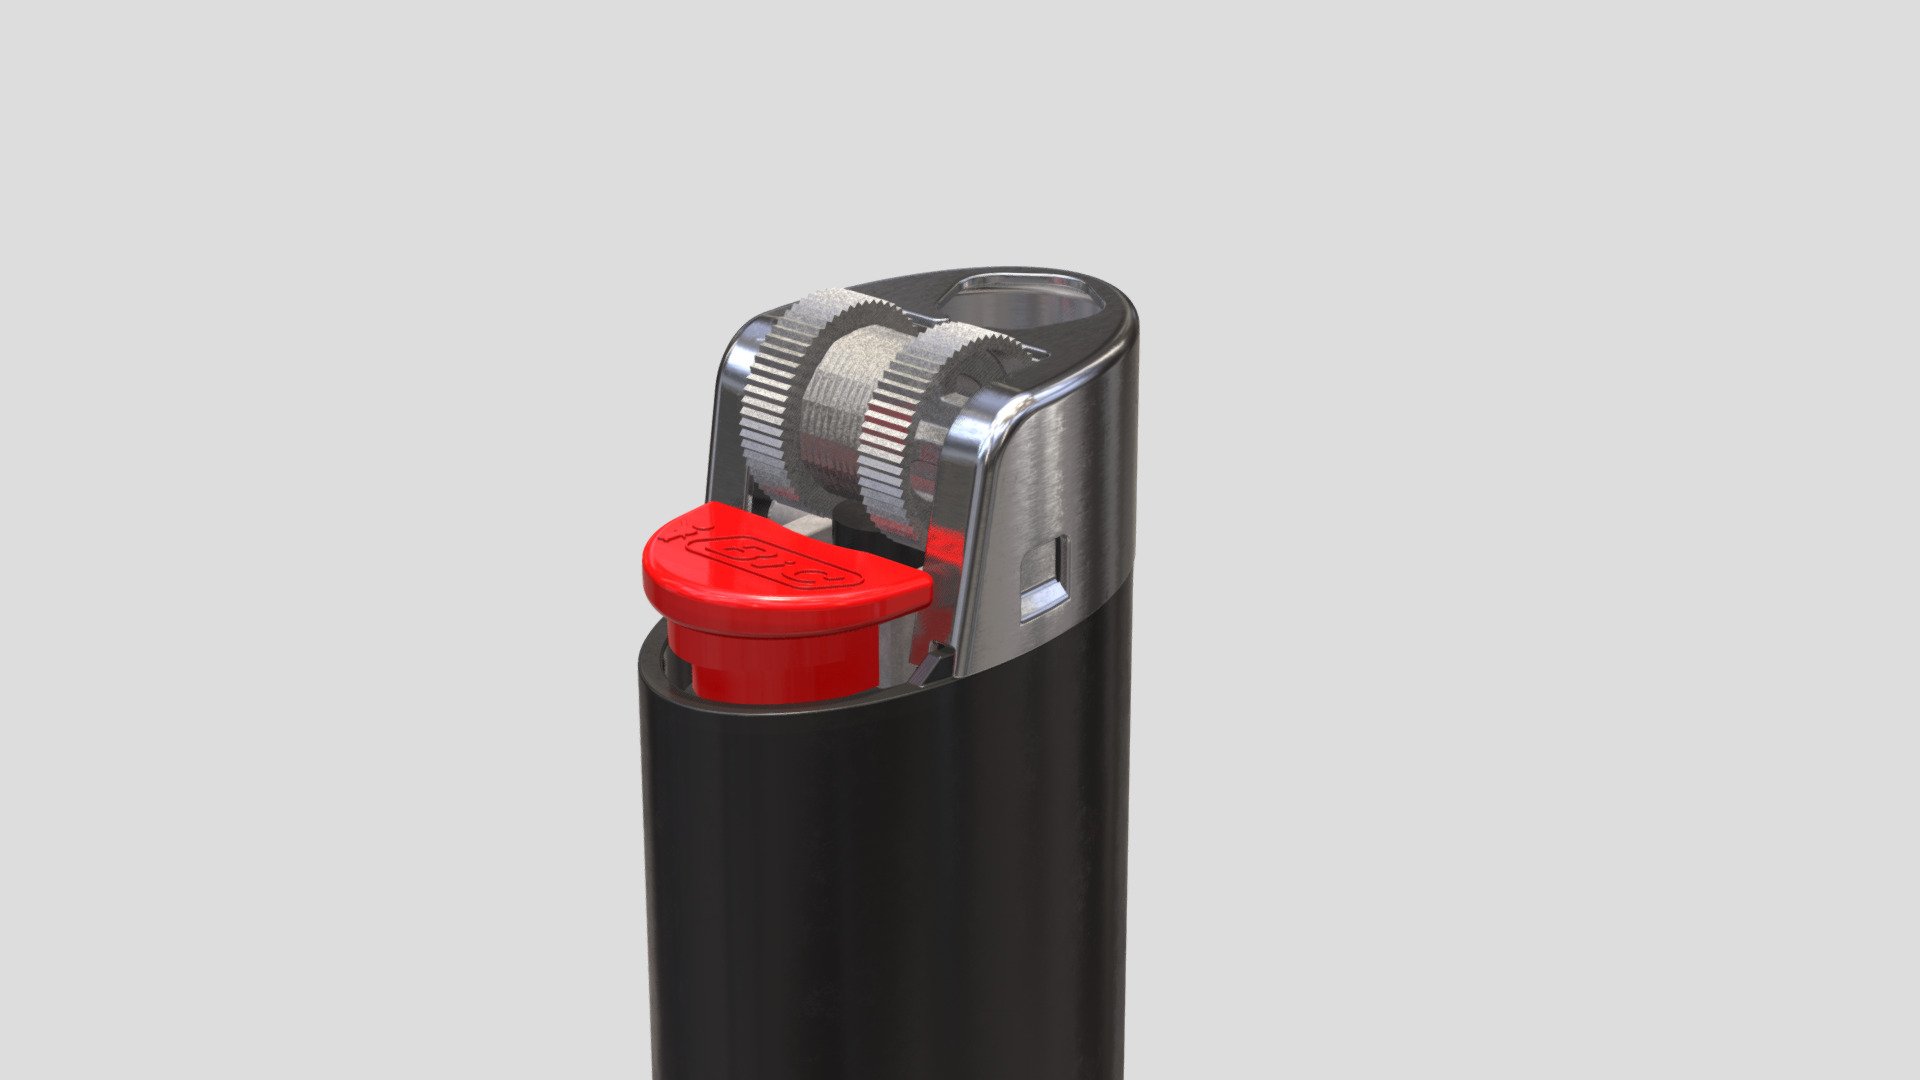 The world famous and trusted BIC lighter.
Comes in many other colors.
Contains isobutane gas.

This 3D model doesn't have the child-safety, since it is supposed to be an older BIC lighter.

BIC logo print / sticker was not added 3d model